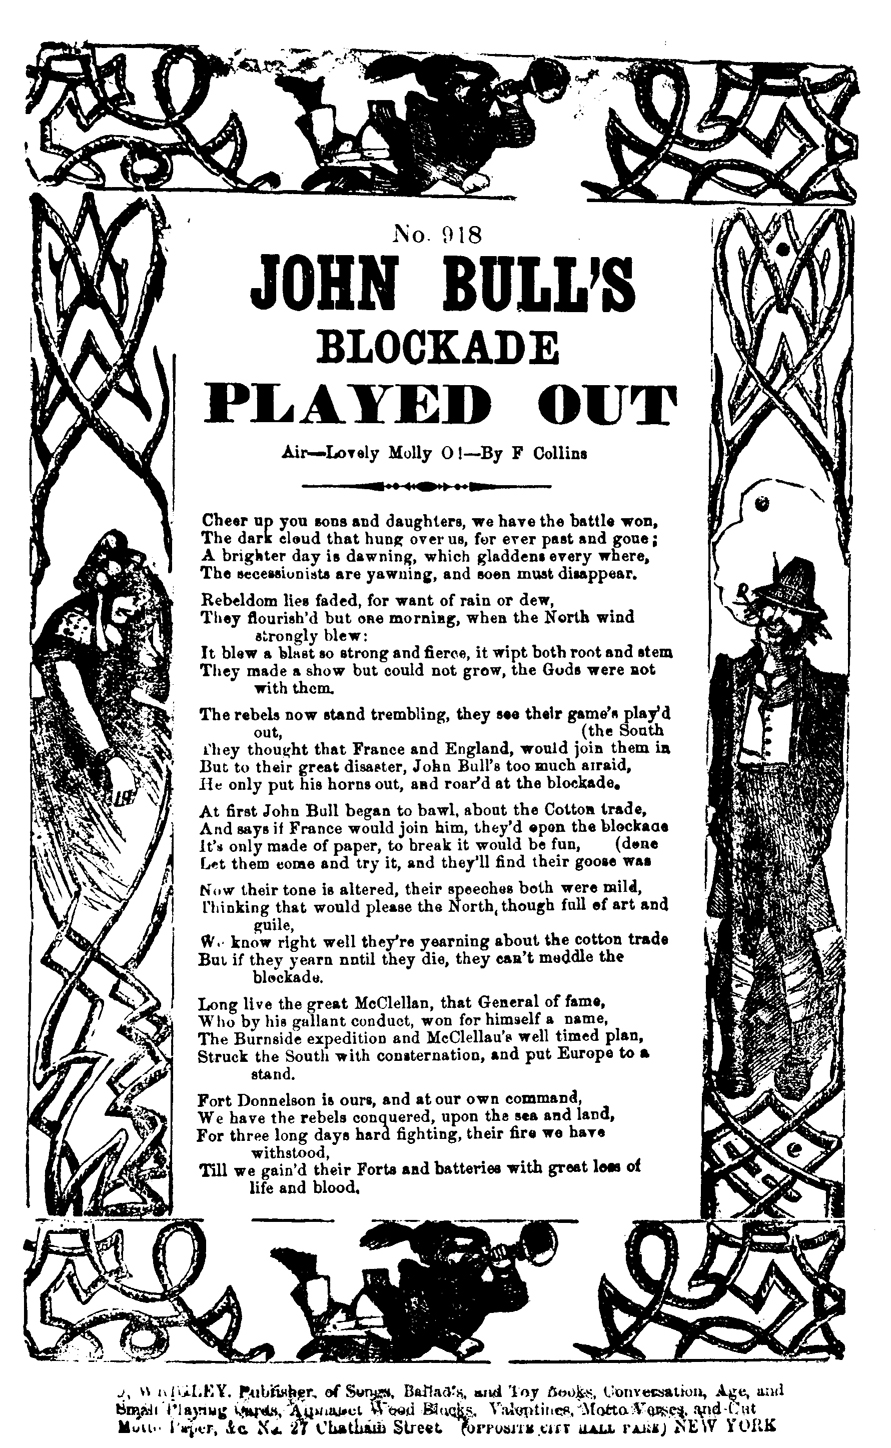 Though this cartoon comically portrays southern efforts to court English support, the Union was concerned about potential British assistance to From the Union perspective, the blockade was a success, heralded in lyrics like the following: "The rebels now stand trembling, they see their game's play'd out, They thought that France and England, would join them in the South But to their great disaster, John Bull's too much afraid, He only put his horns out, and roar'd at the blockade." (Rare Book and Special Collections Division, Library of Congress [cw 103060])